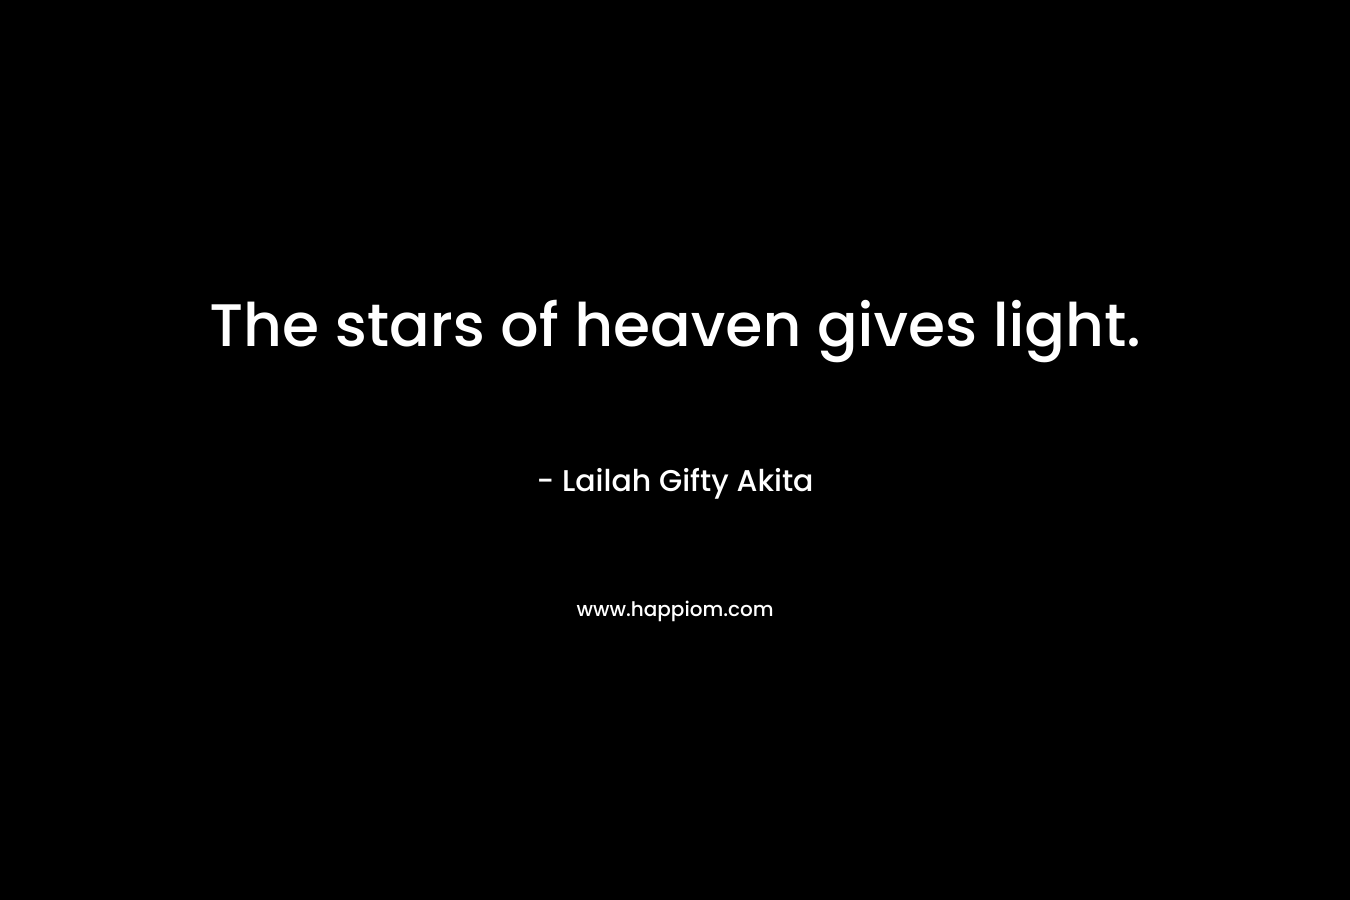 The stars of heaven gives light.